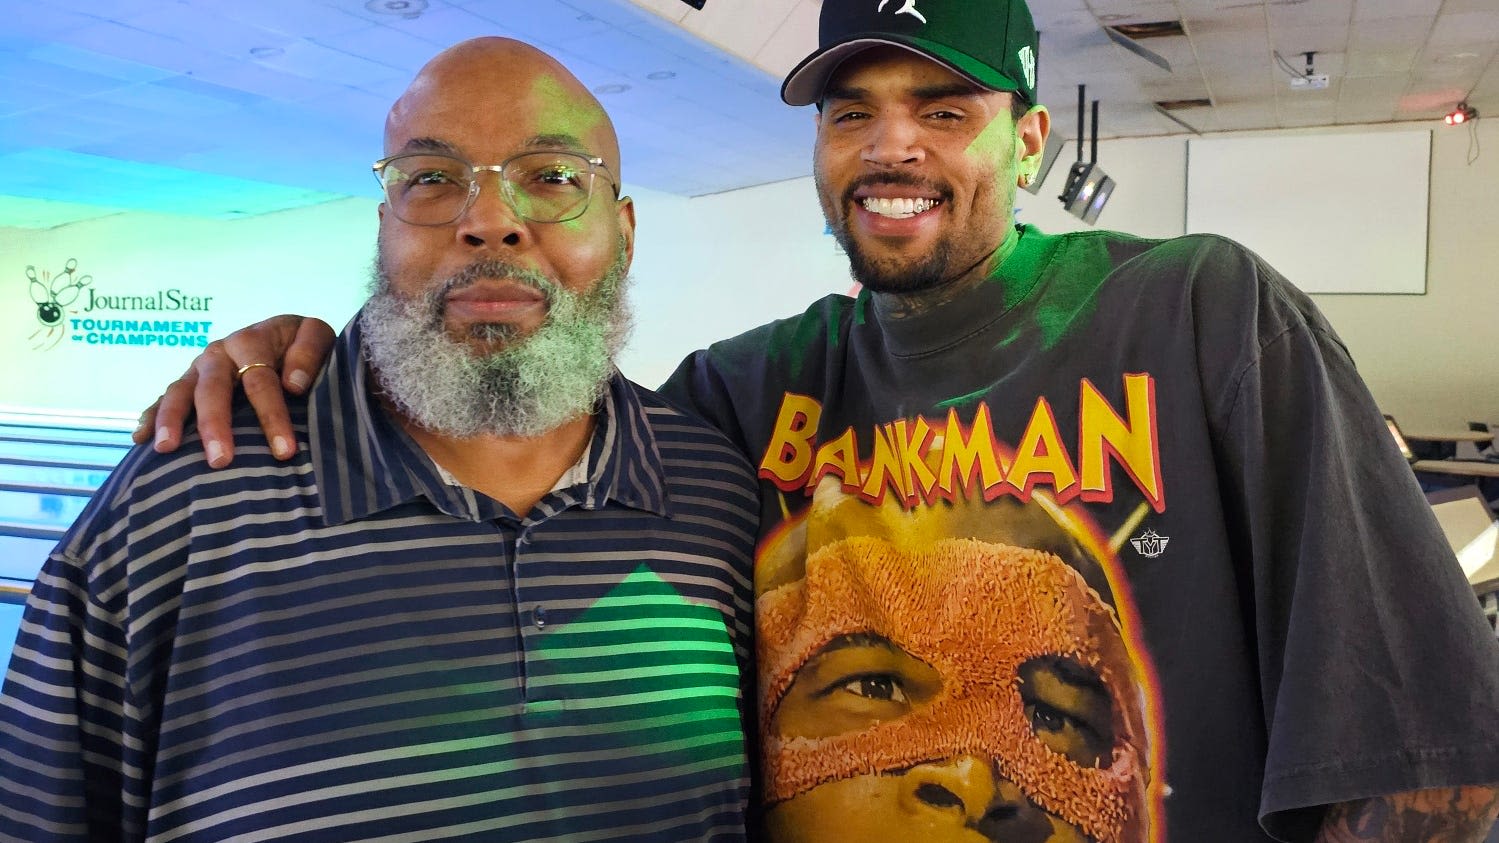 R&B superstar Chris Brown goes bowling and practices in Peoria ahead of Chicago concerts